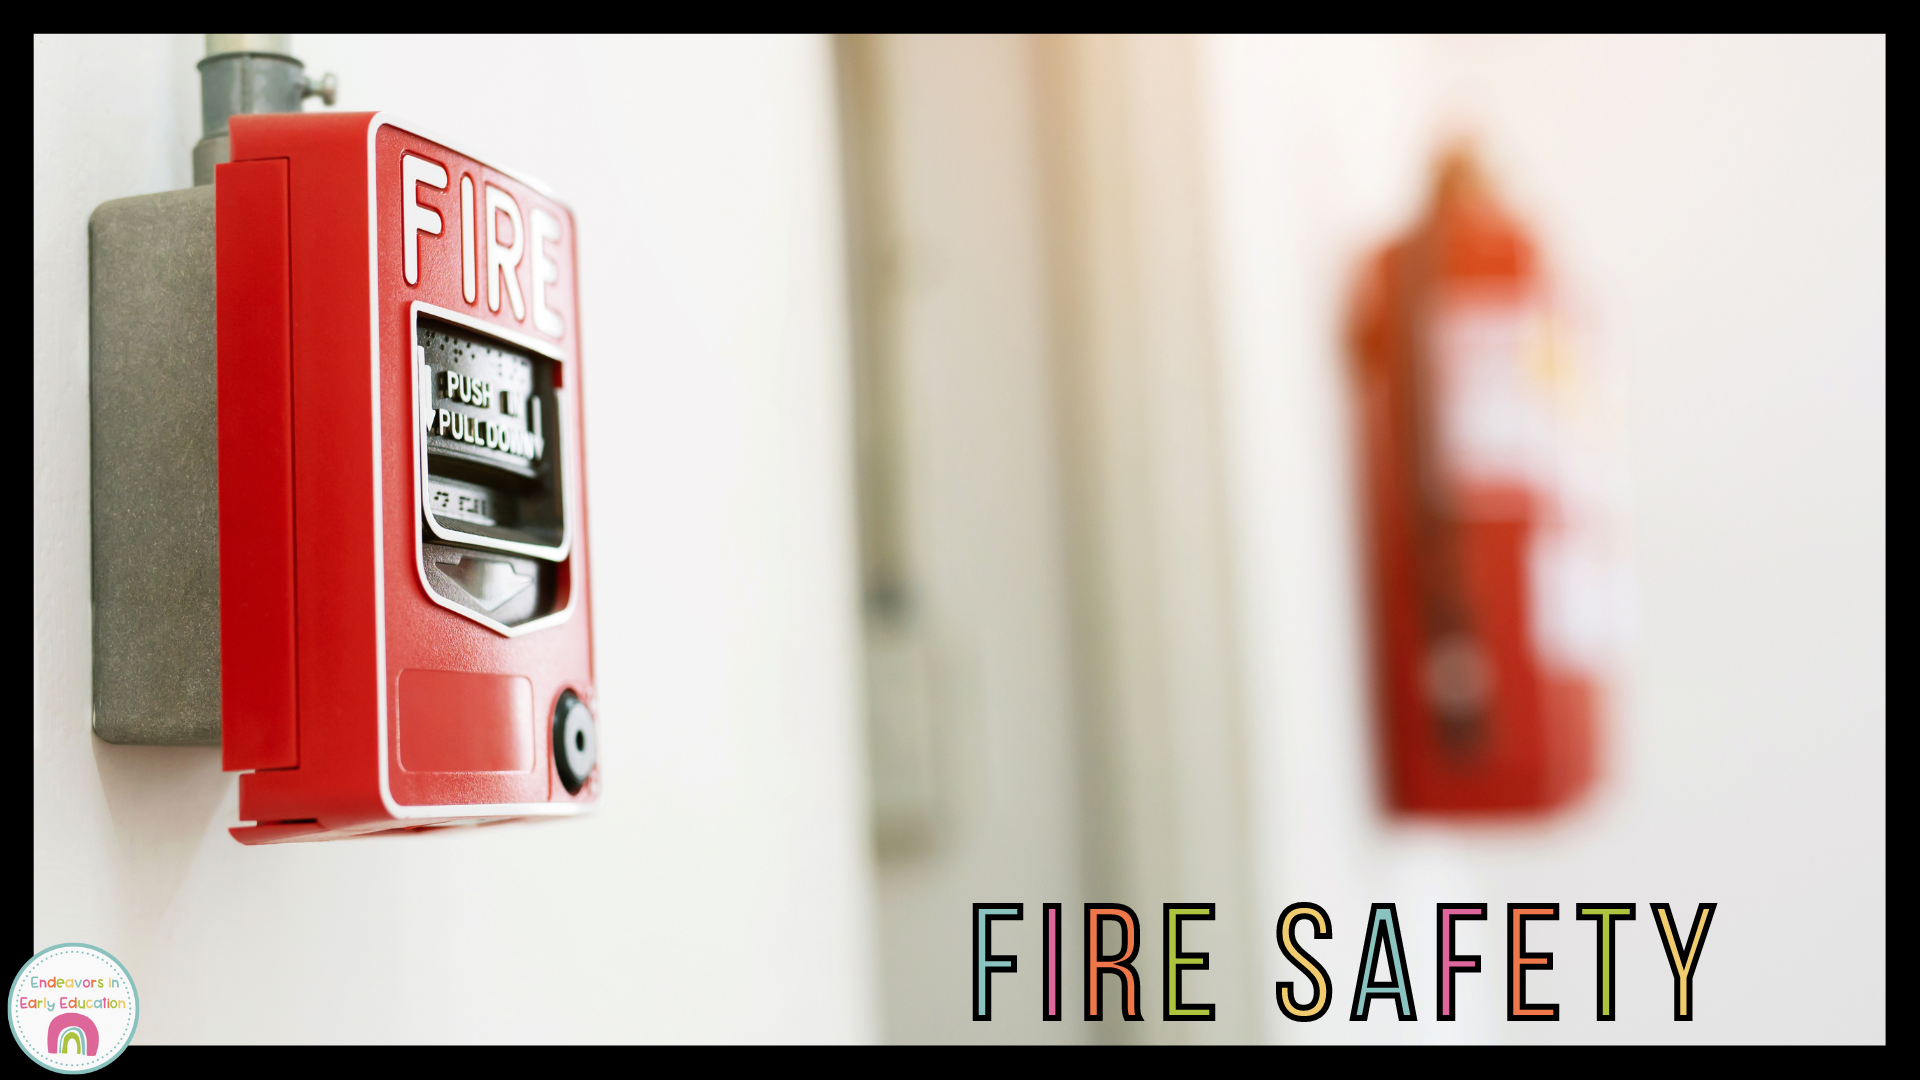 Image shows a fire alarm and fire extinguisher in the background with the words fire safety written in the foreground